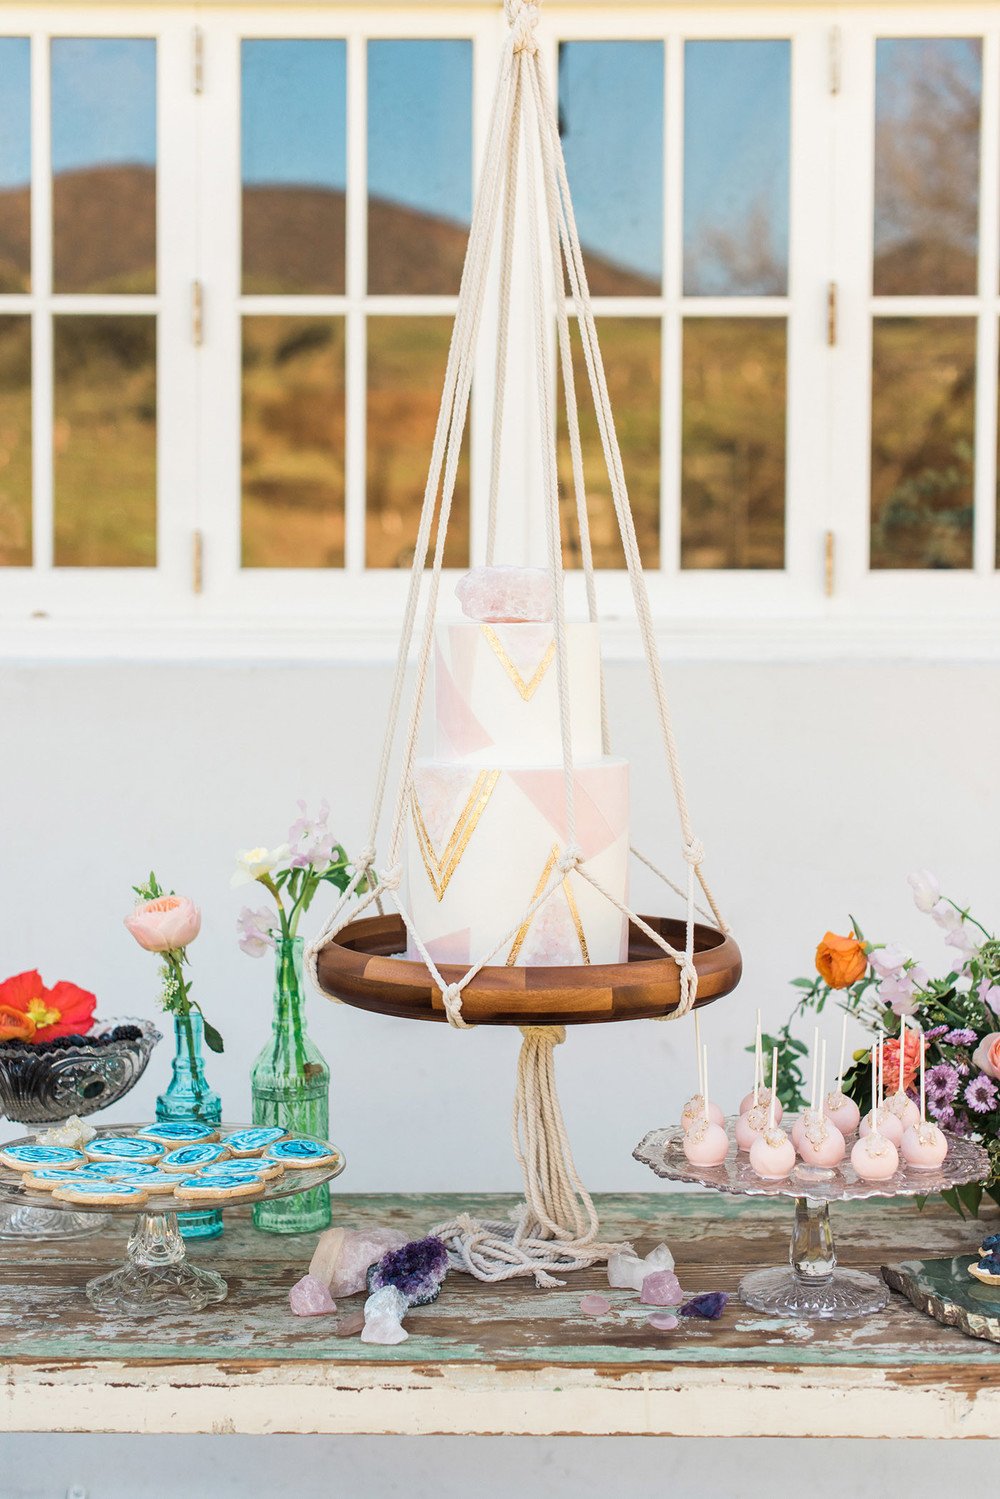 Boho meets modern. Minimalist wedding cake with geometric triangles pattern on a hanging macramé swing with circular shaped wood base. // Jaw-dropping suspended cake display ideas for your wedding day. // mysweetengagement.com